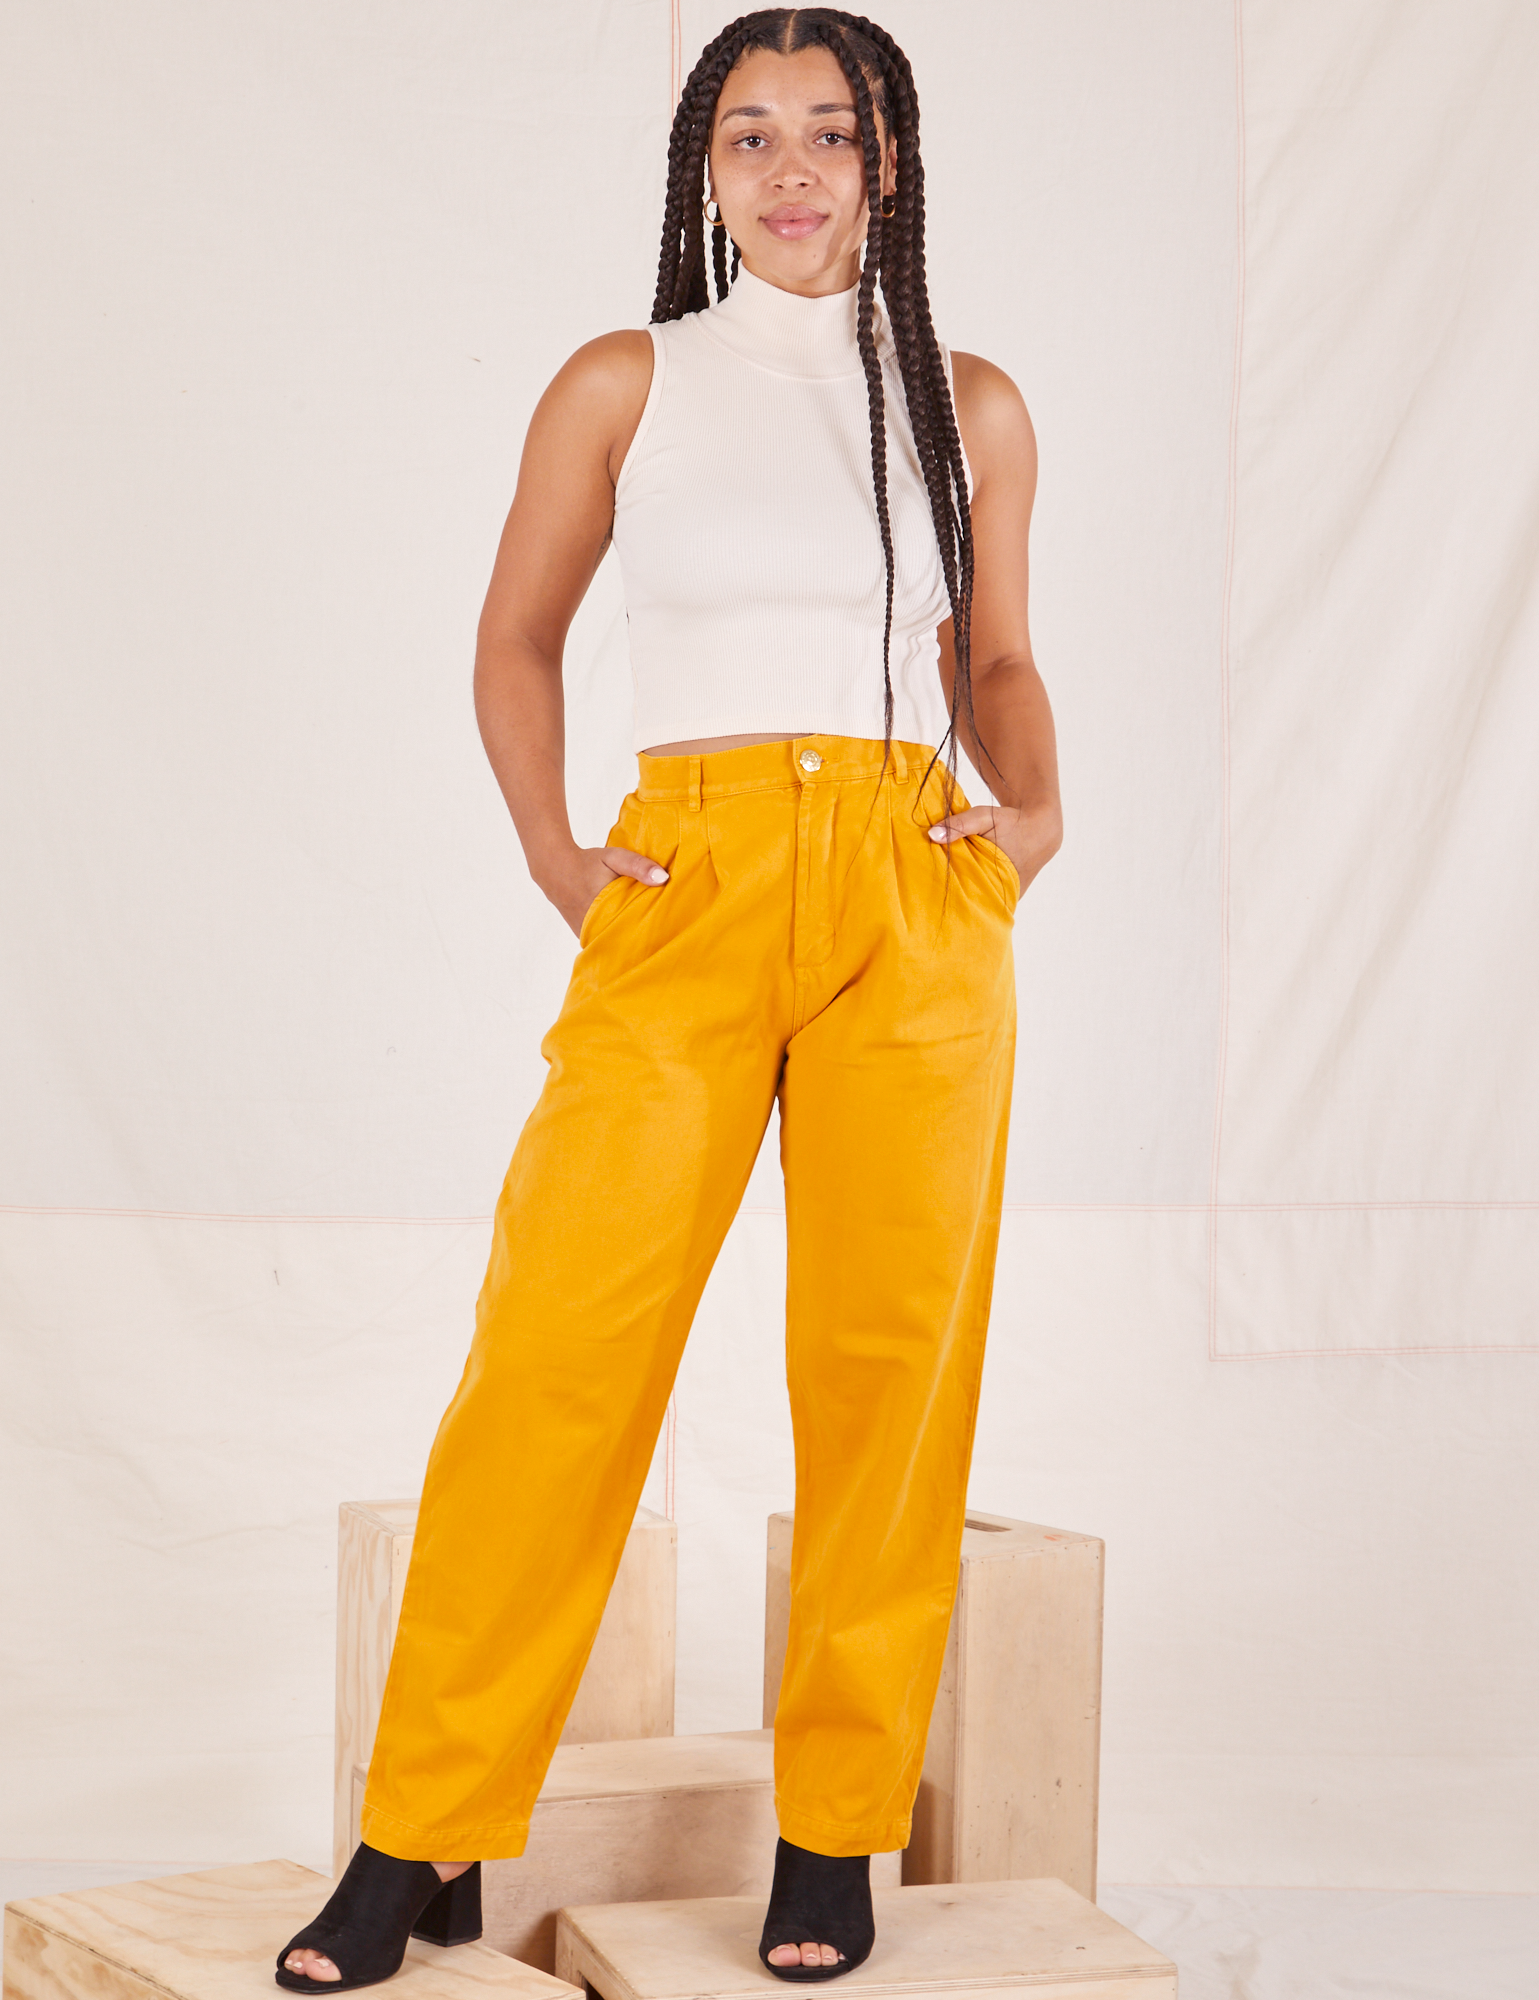 Gabi is 5&#39;7&quot; and wearing XXS Organic Trousers in Mustard Yellow paired with vintage off-white Sleeveless Essential Turtleneck